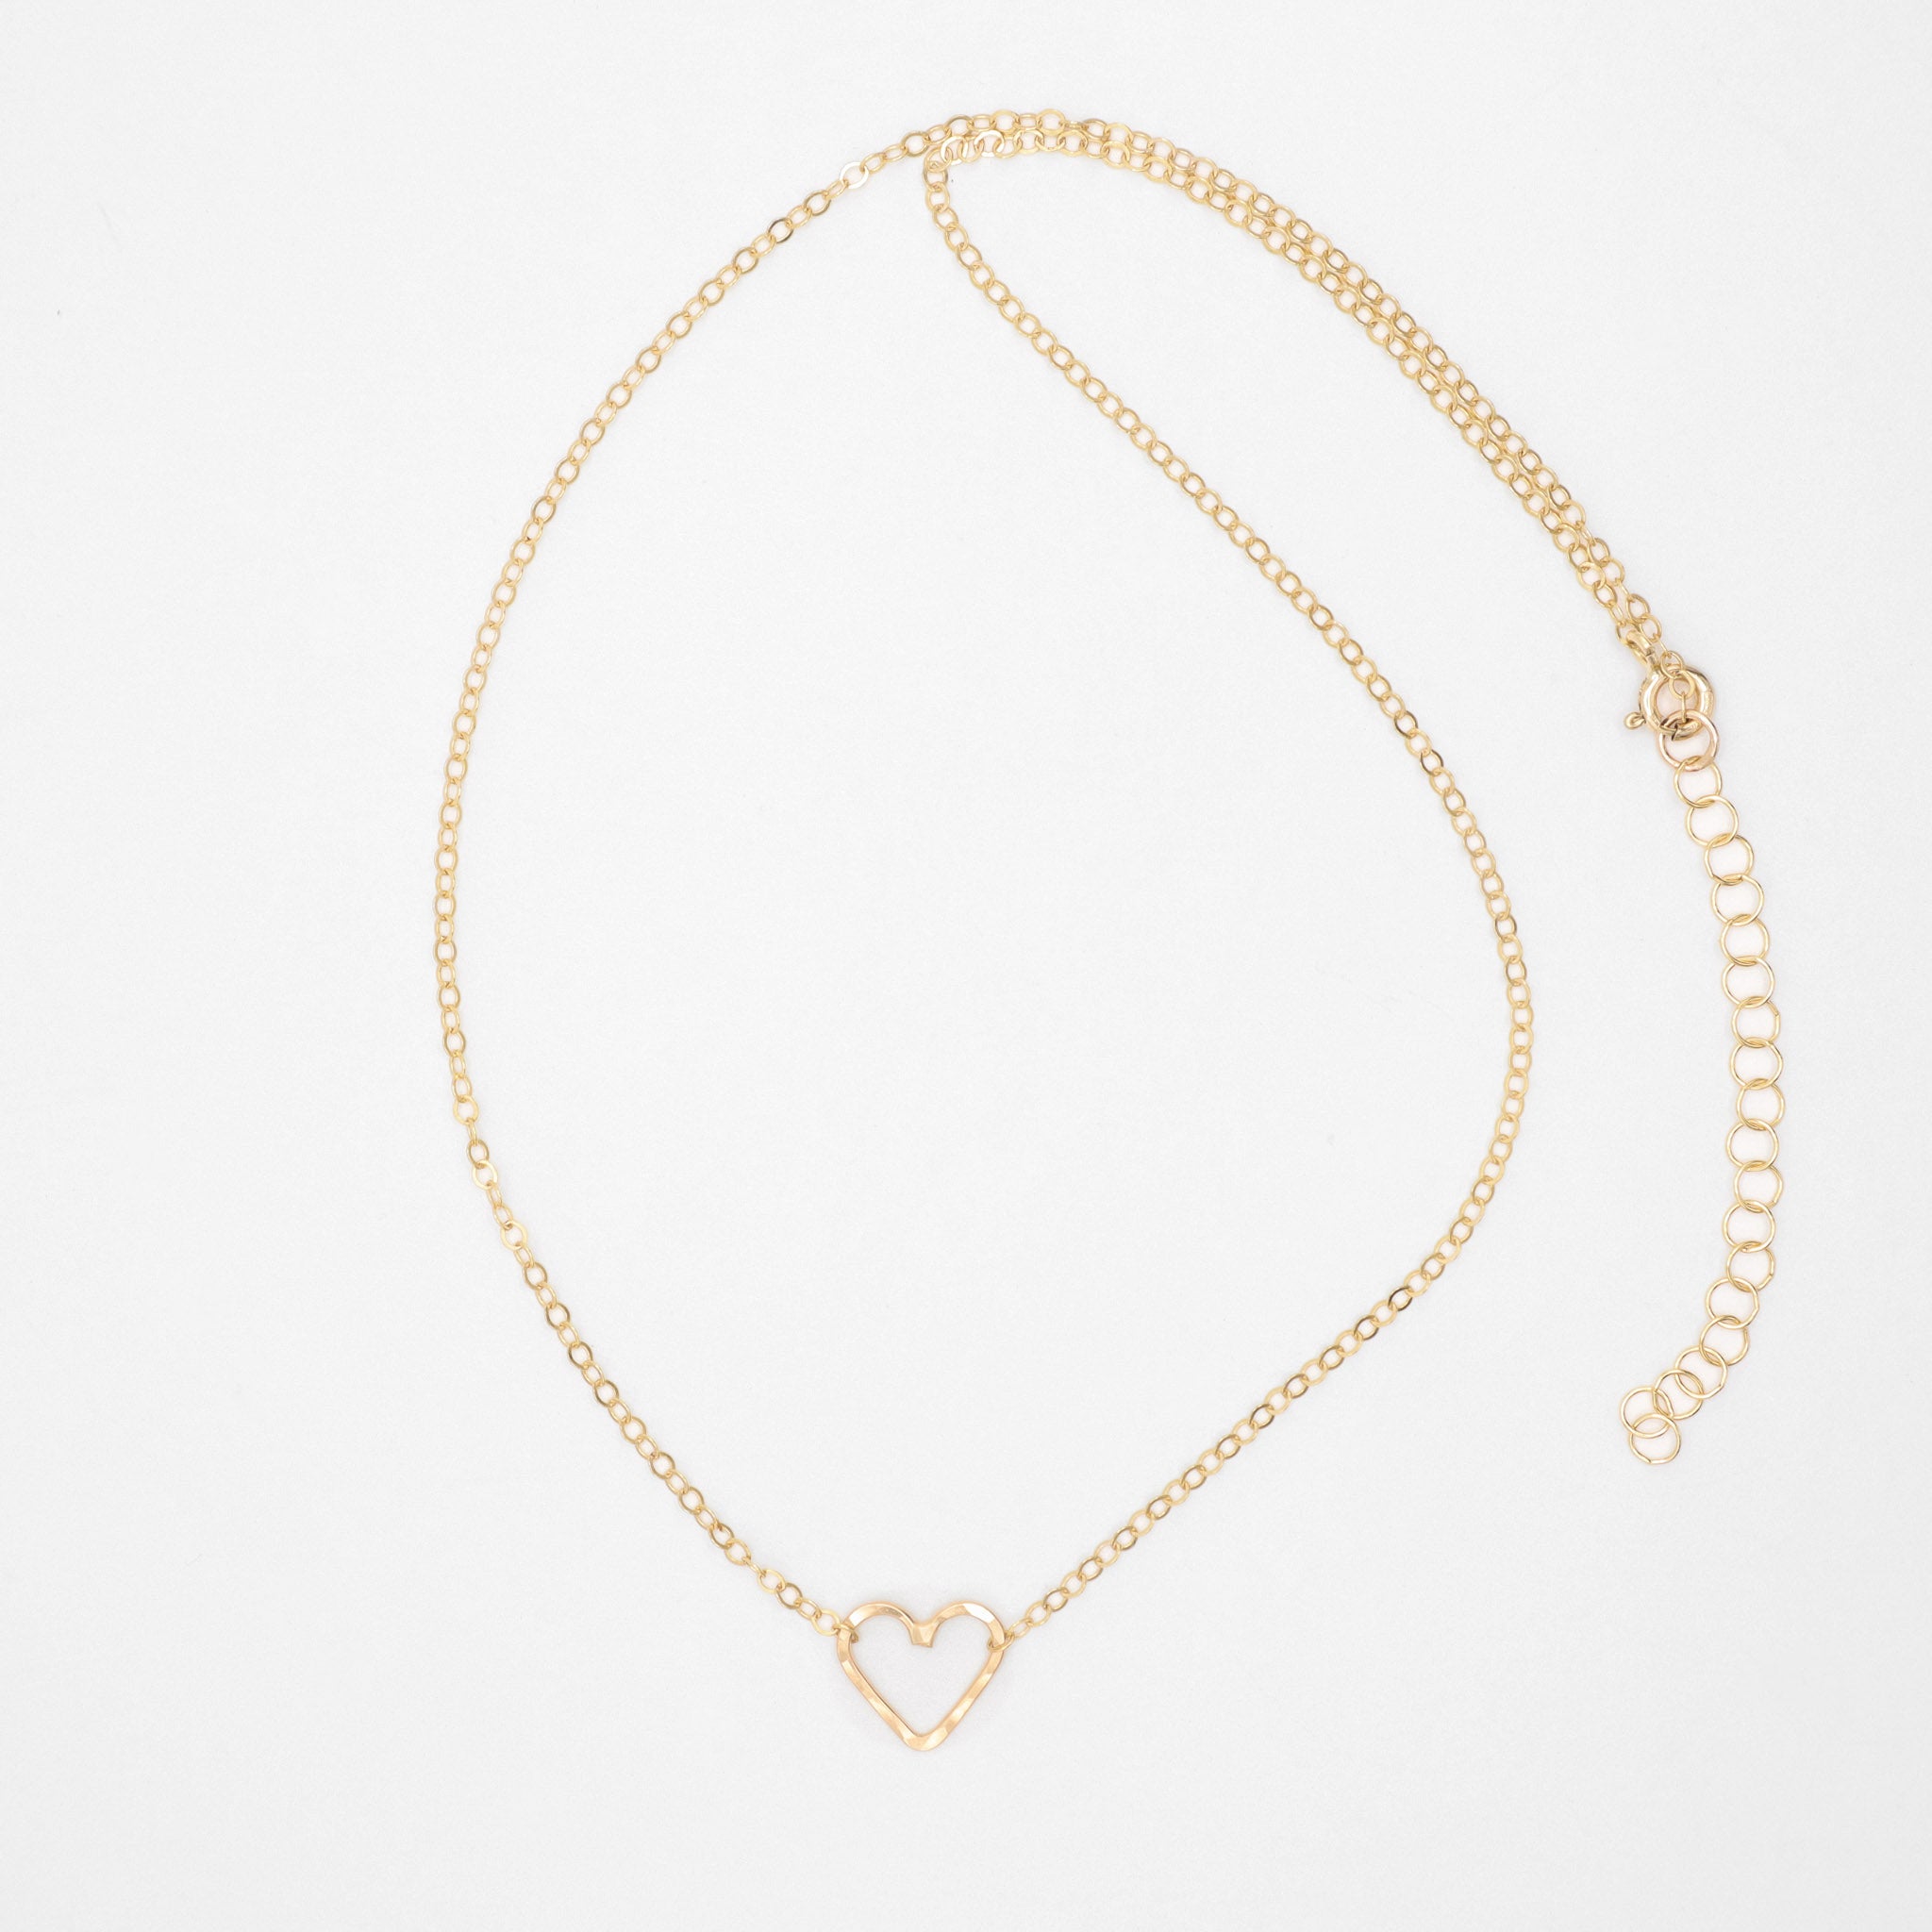 Gold Sweetheart Necklace, full view image